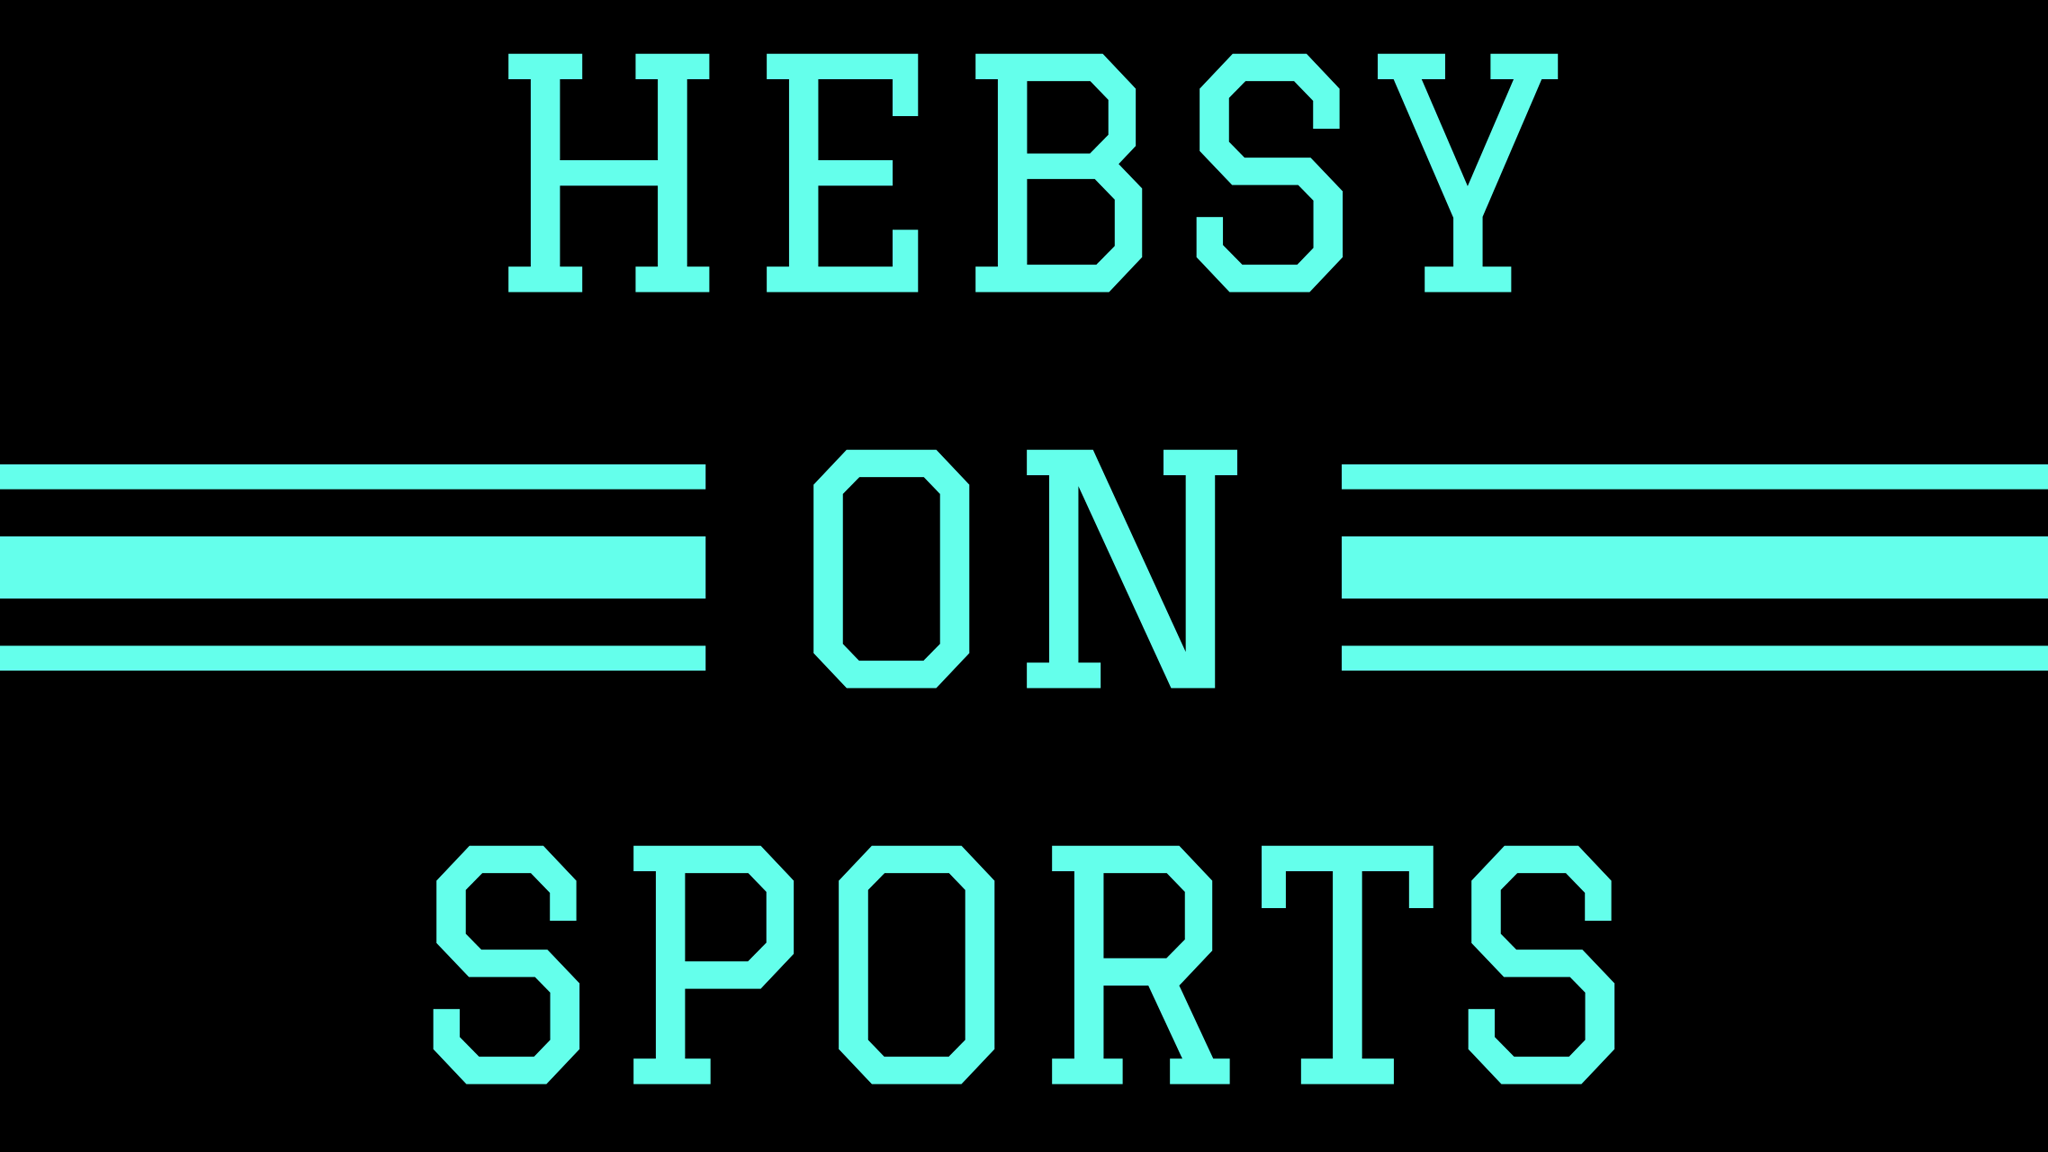 Hebsy on Sports for July 16, 2021